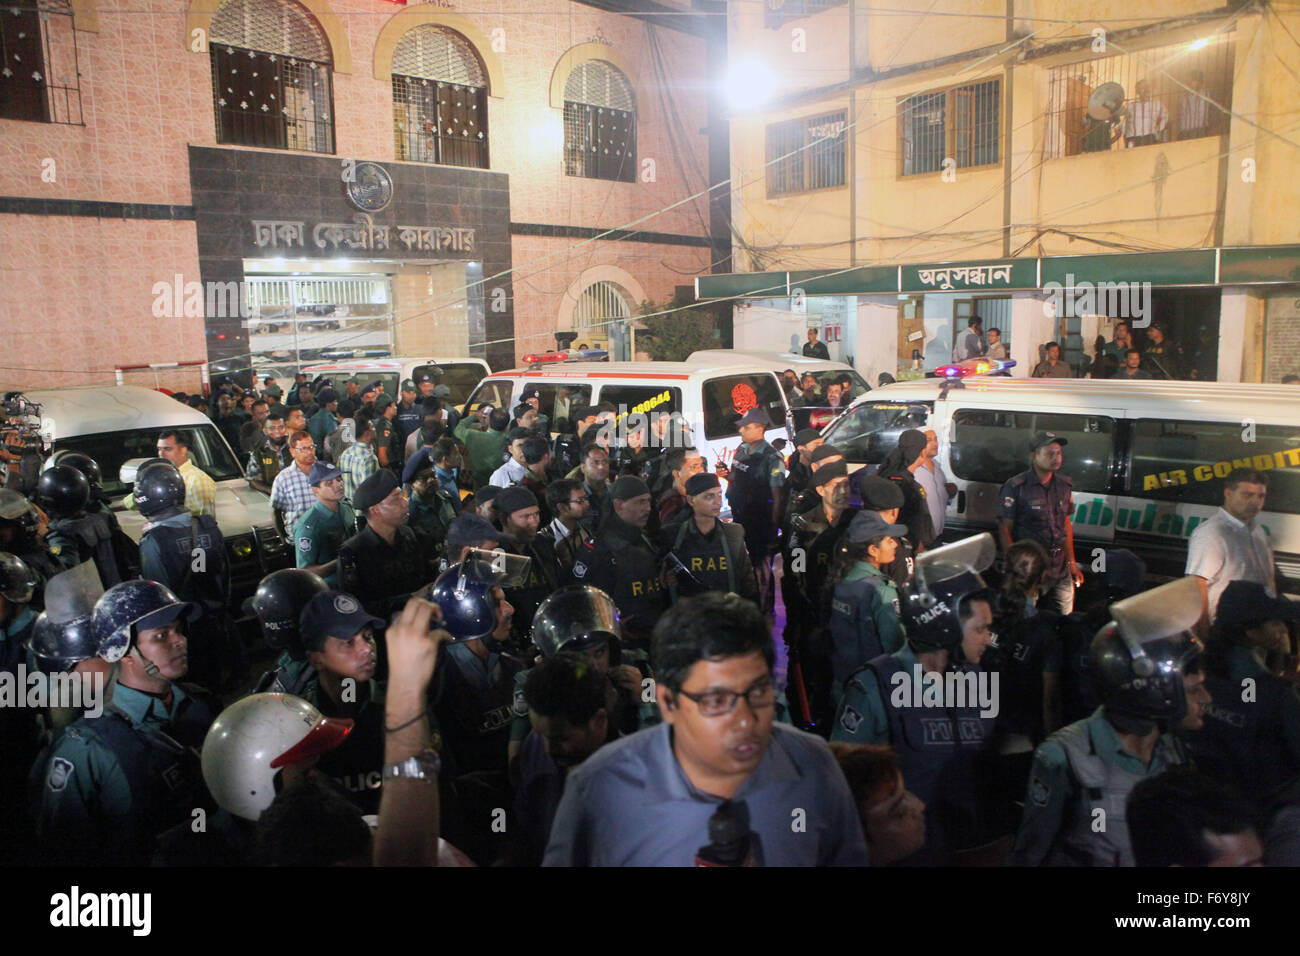 Dhaka, Bangladesh. 22nd Nov, 2015.  A mbulances enter into Jail to carry dead body of war criminals Salauddin Quader Chowdhury and Ali Ahsan Muhammad Mojaheed in Dhaka on November 22, 2015.Two war criminals, BNP leader Salauddin Quader Chowdhury and Jamaat-e-Islami secretary general Ali Ahsan Mohammad Mojaheed, have been executed at the same time for their crimes committed against humanity in 1971, says jail official.They were executed by hanging at 12:55am Sunday at Dhaka Central Jail, said Inspector General of Prison Syed Iftekhar Uddin.Both of them were © ZUM © ZUMA Press, Inc./Alamy Live N Stock Photo